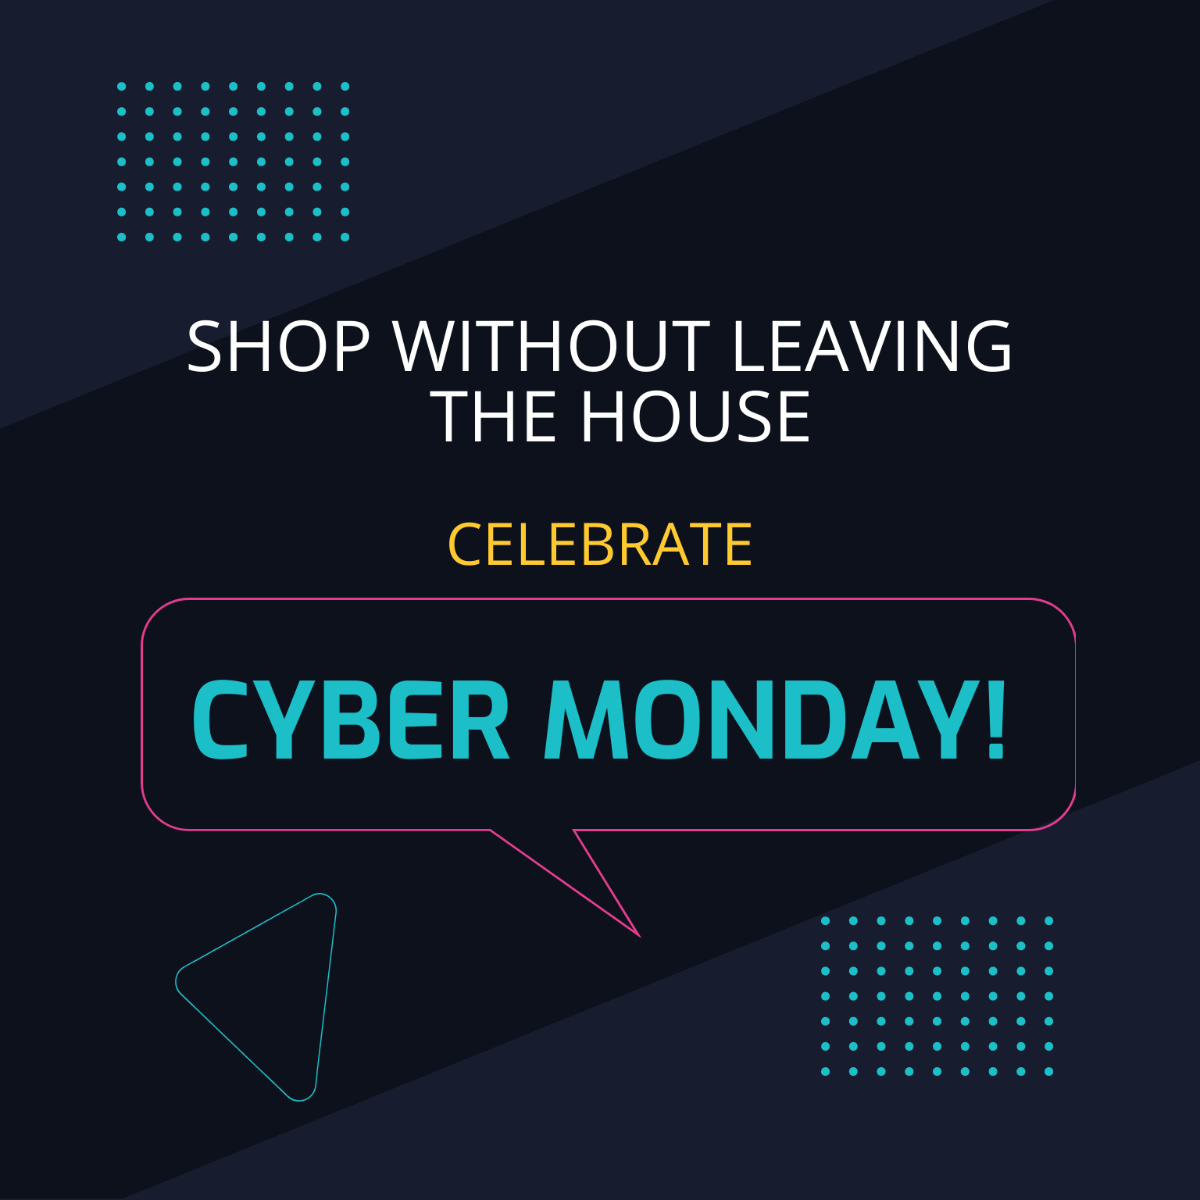 Cyber Monday Quote Vector